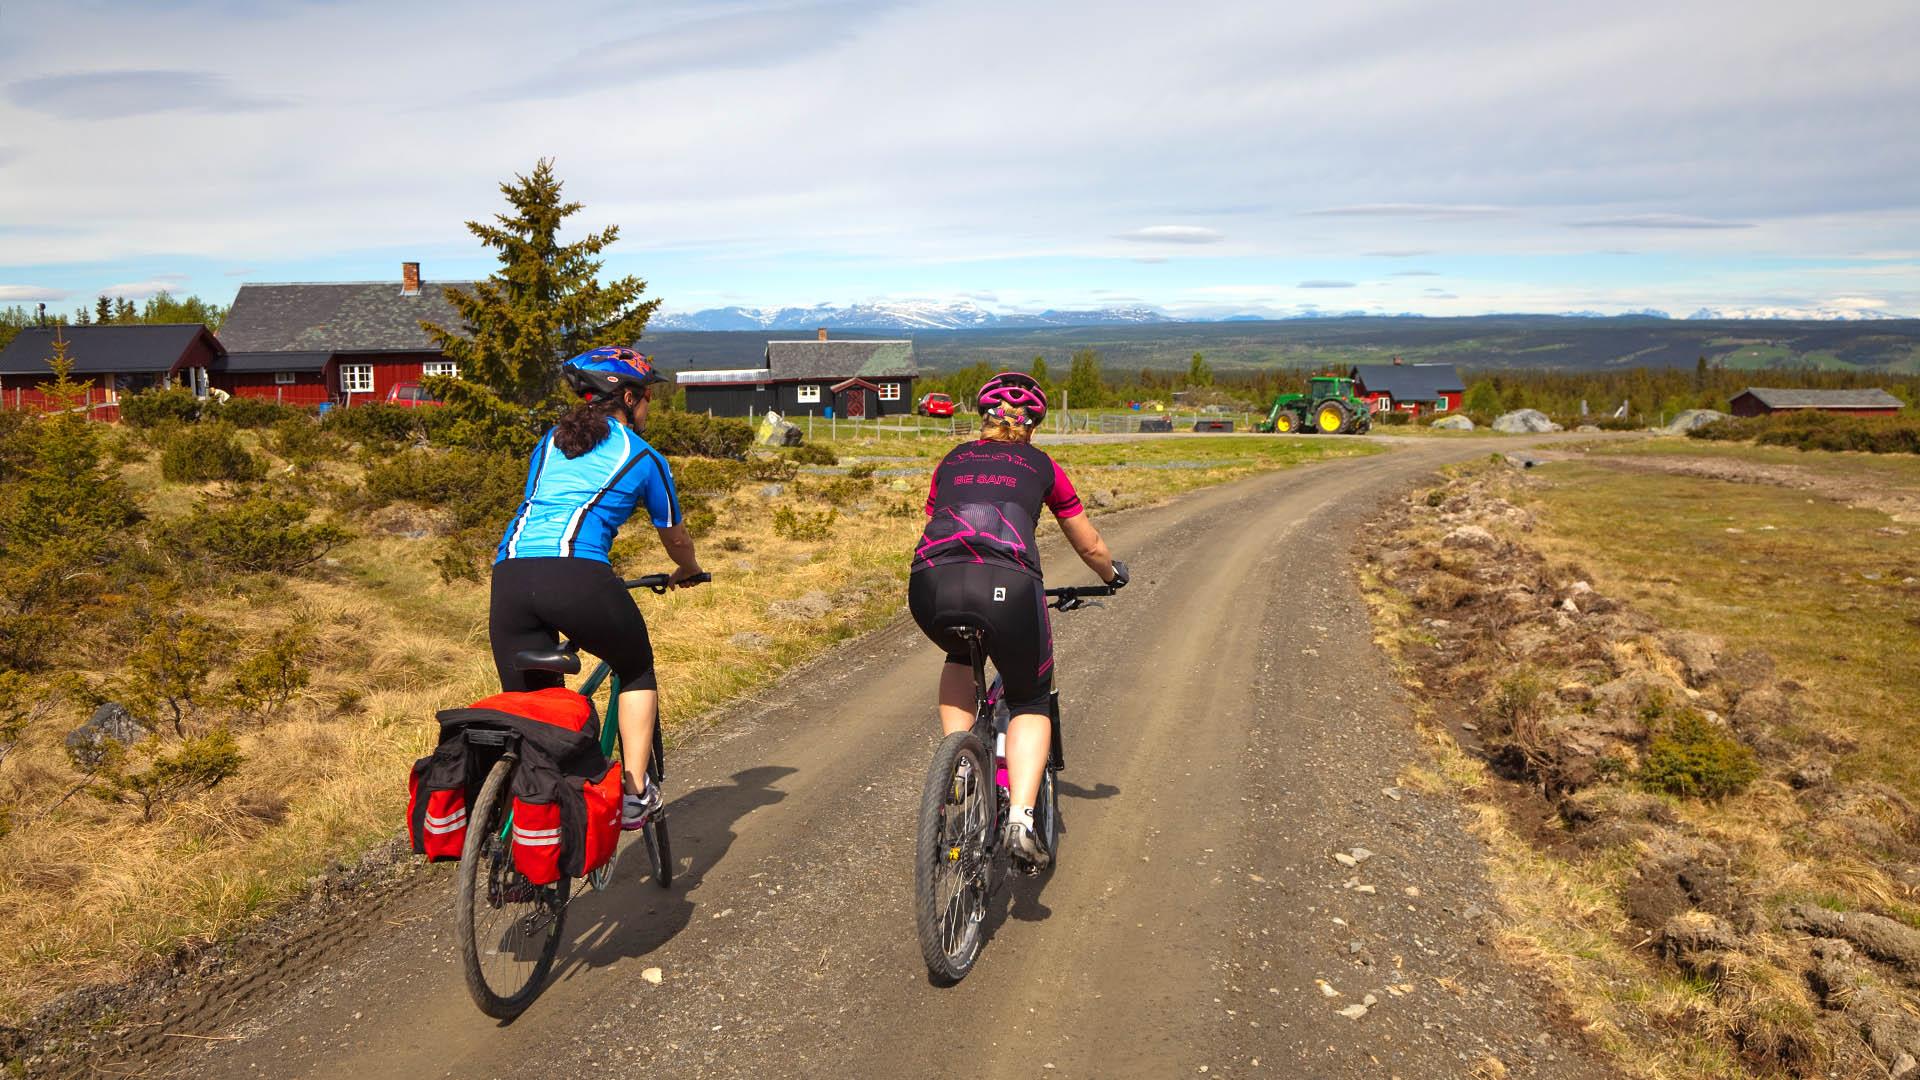 Two cycling ladies on a mountain gravel road arrive at a mountain farm with some buildings and a tractor in early summer.